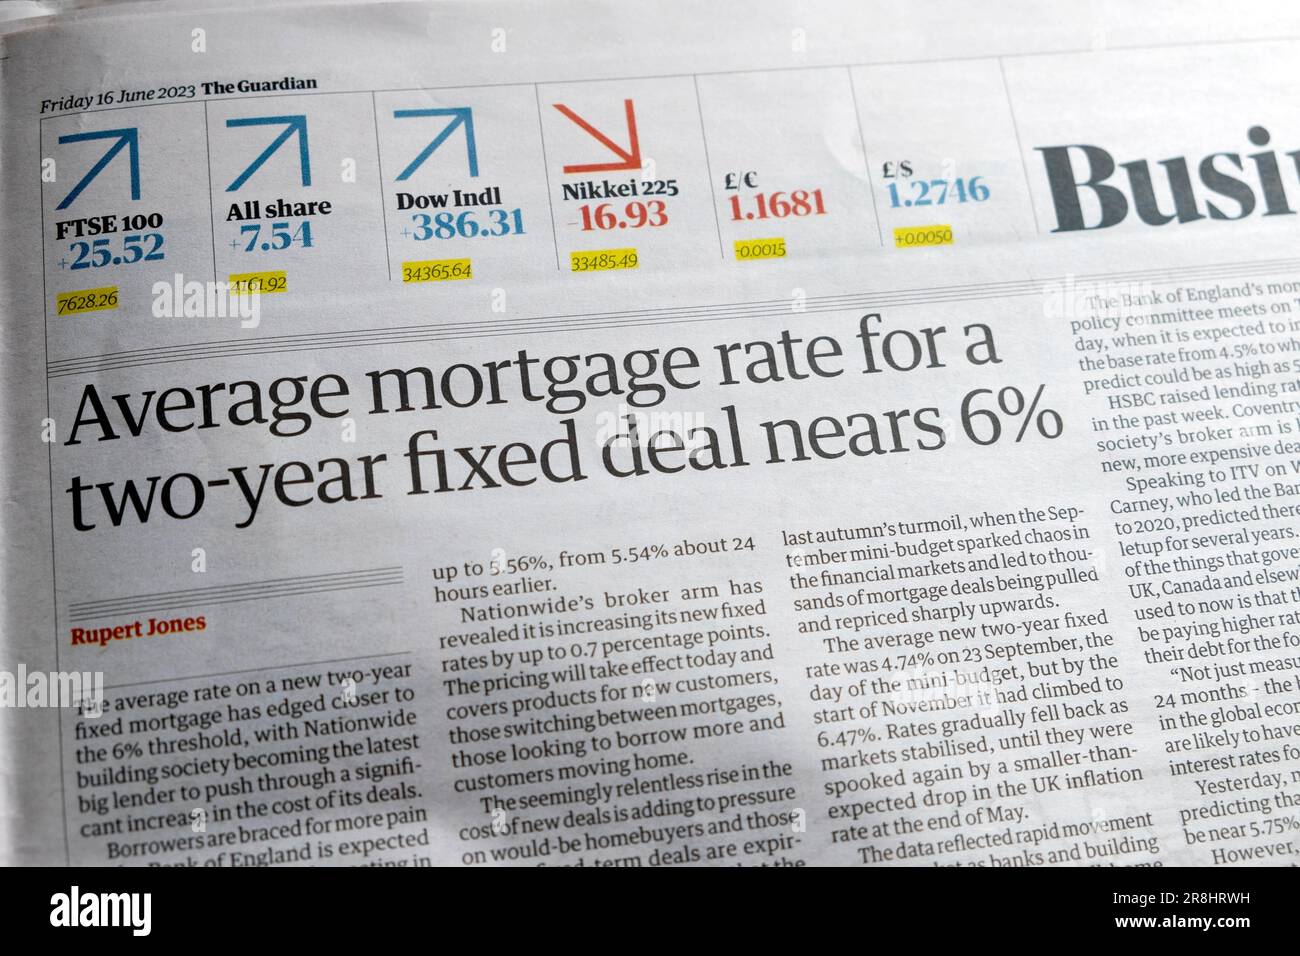 'Average mortgage rate for a two-year fixed deal nears 6%' Guardian newspaper headline Business article 16 June 2023 London UK Great Britain Stock Photo